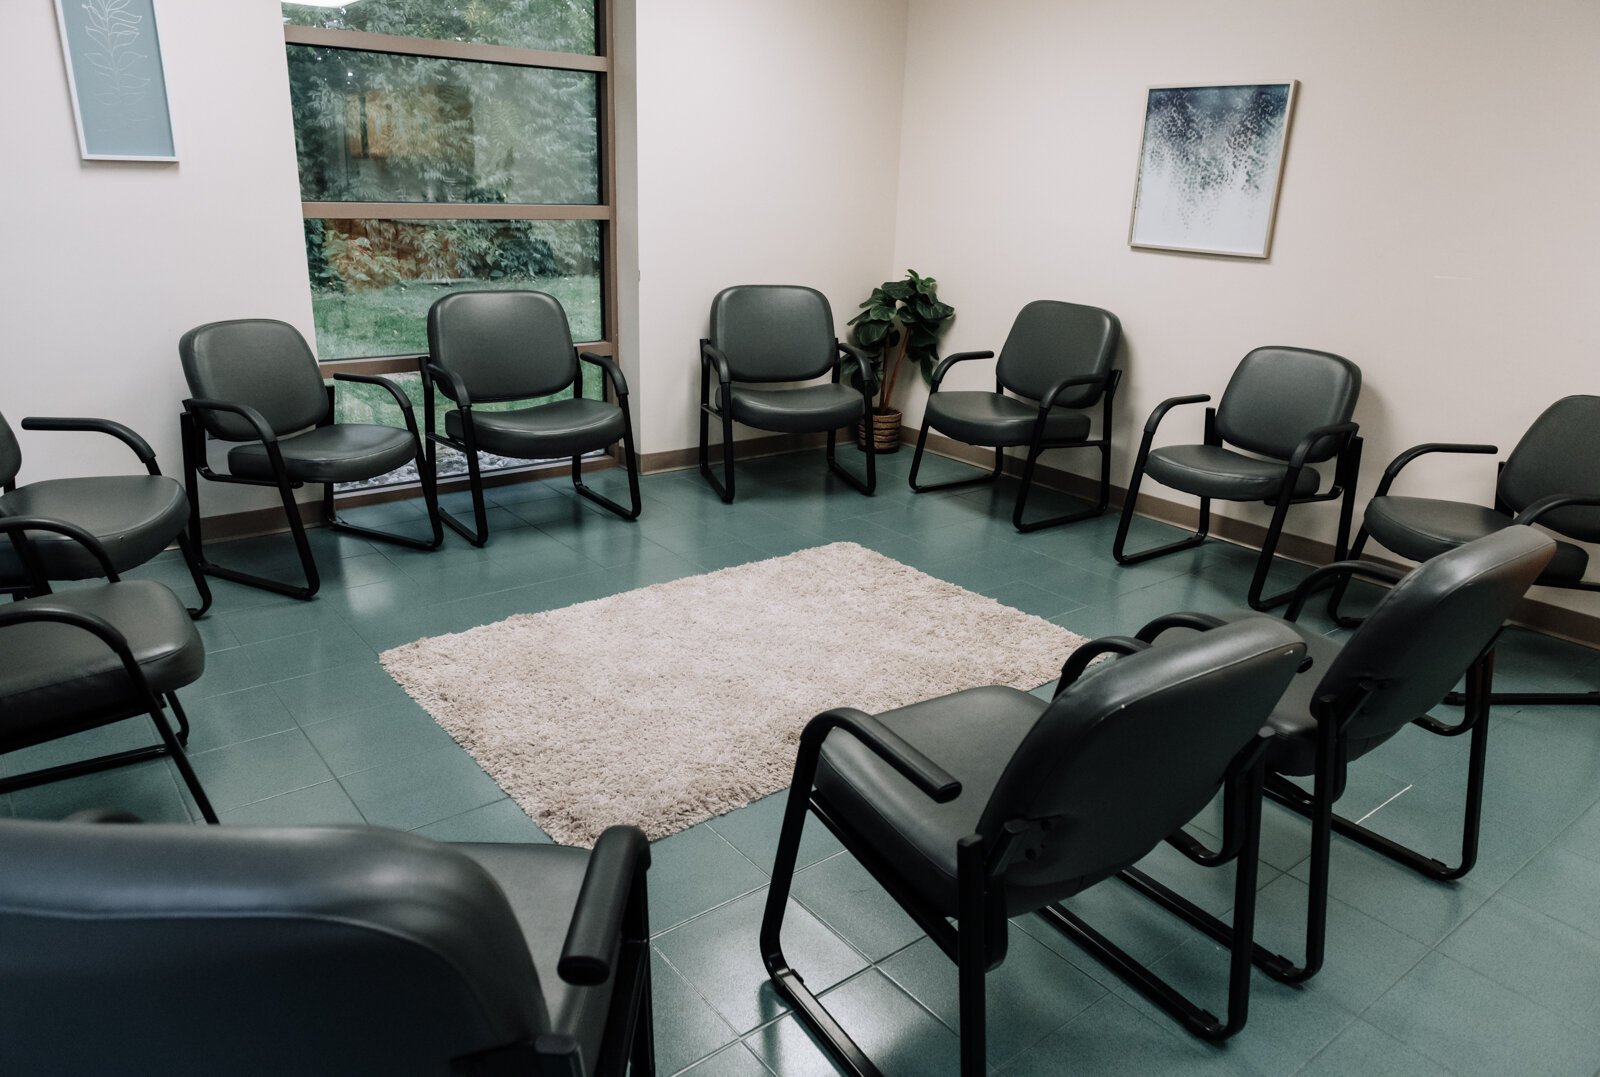 A room is set up for IOP (Intensive Outpatient Program) group sessions at Park Center.